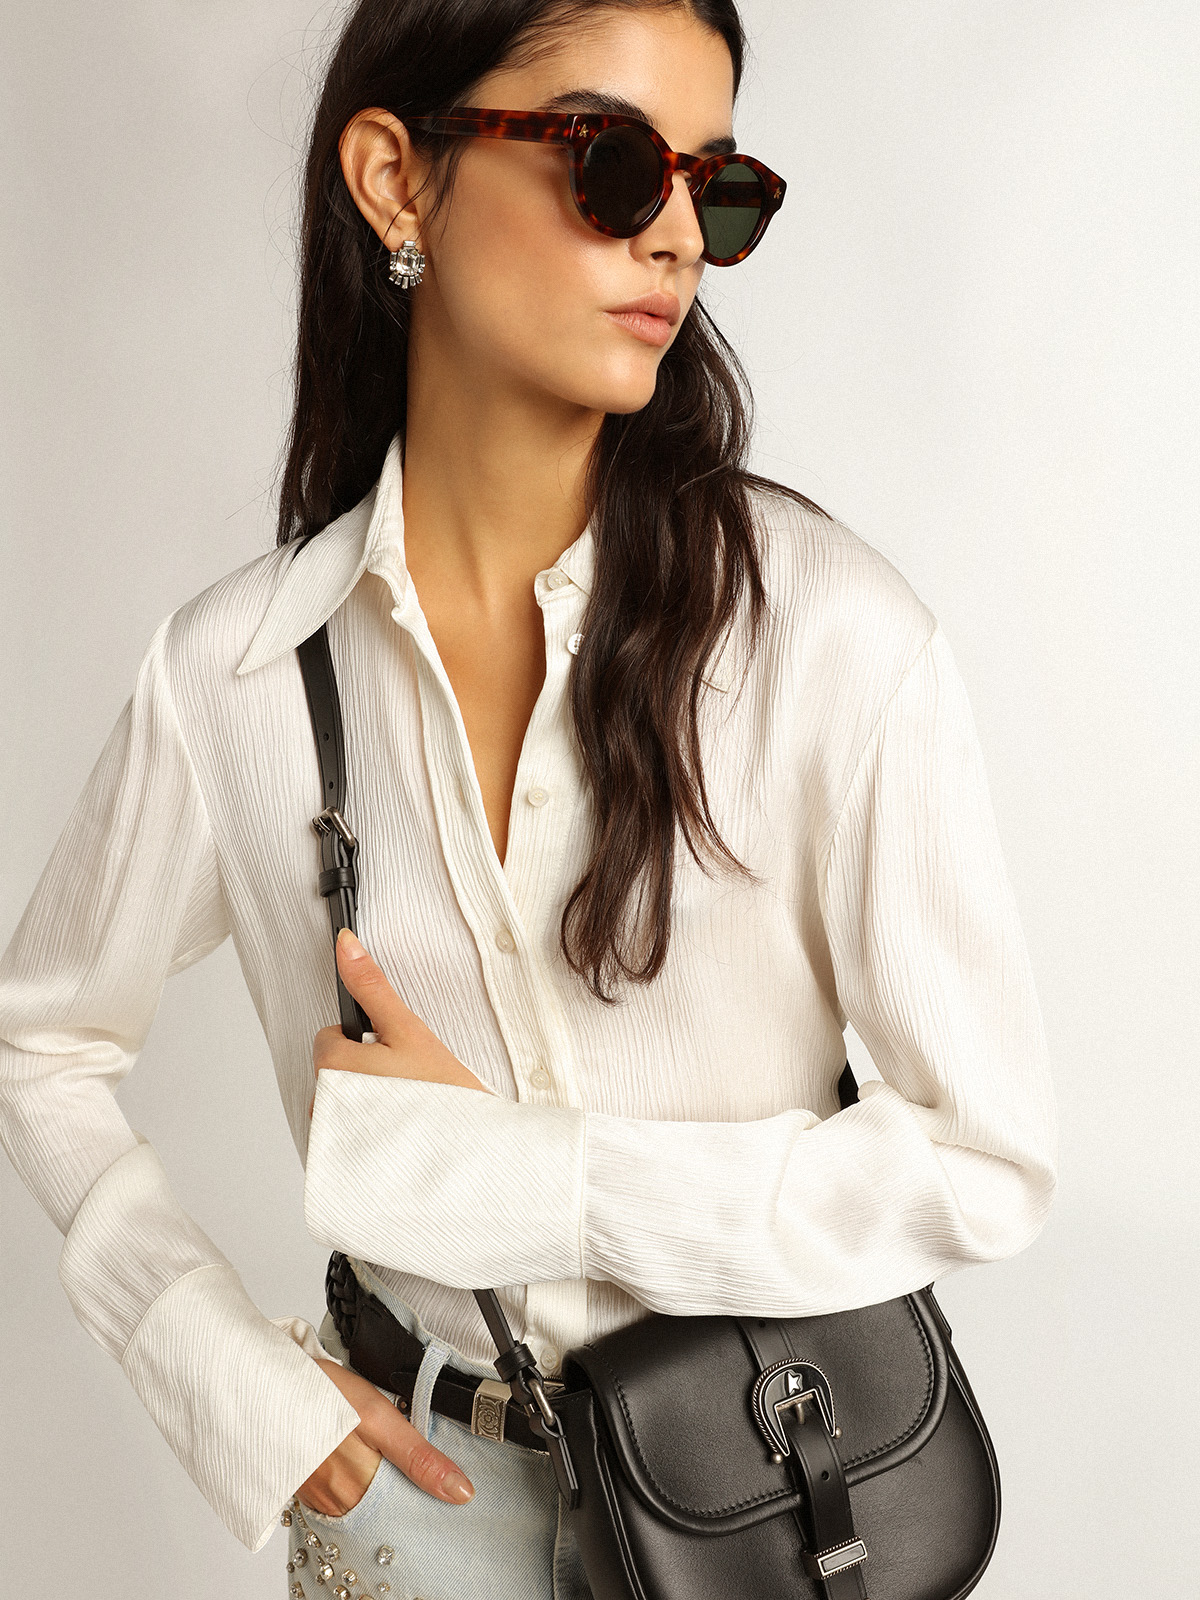 Golden Goose Fitted Shirt Gigi in Offwhite XS